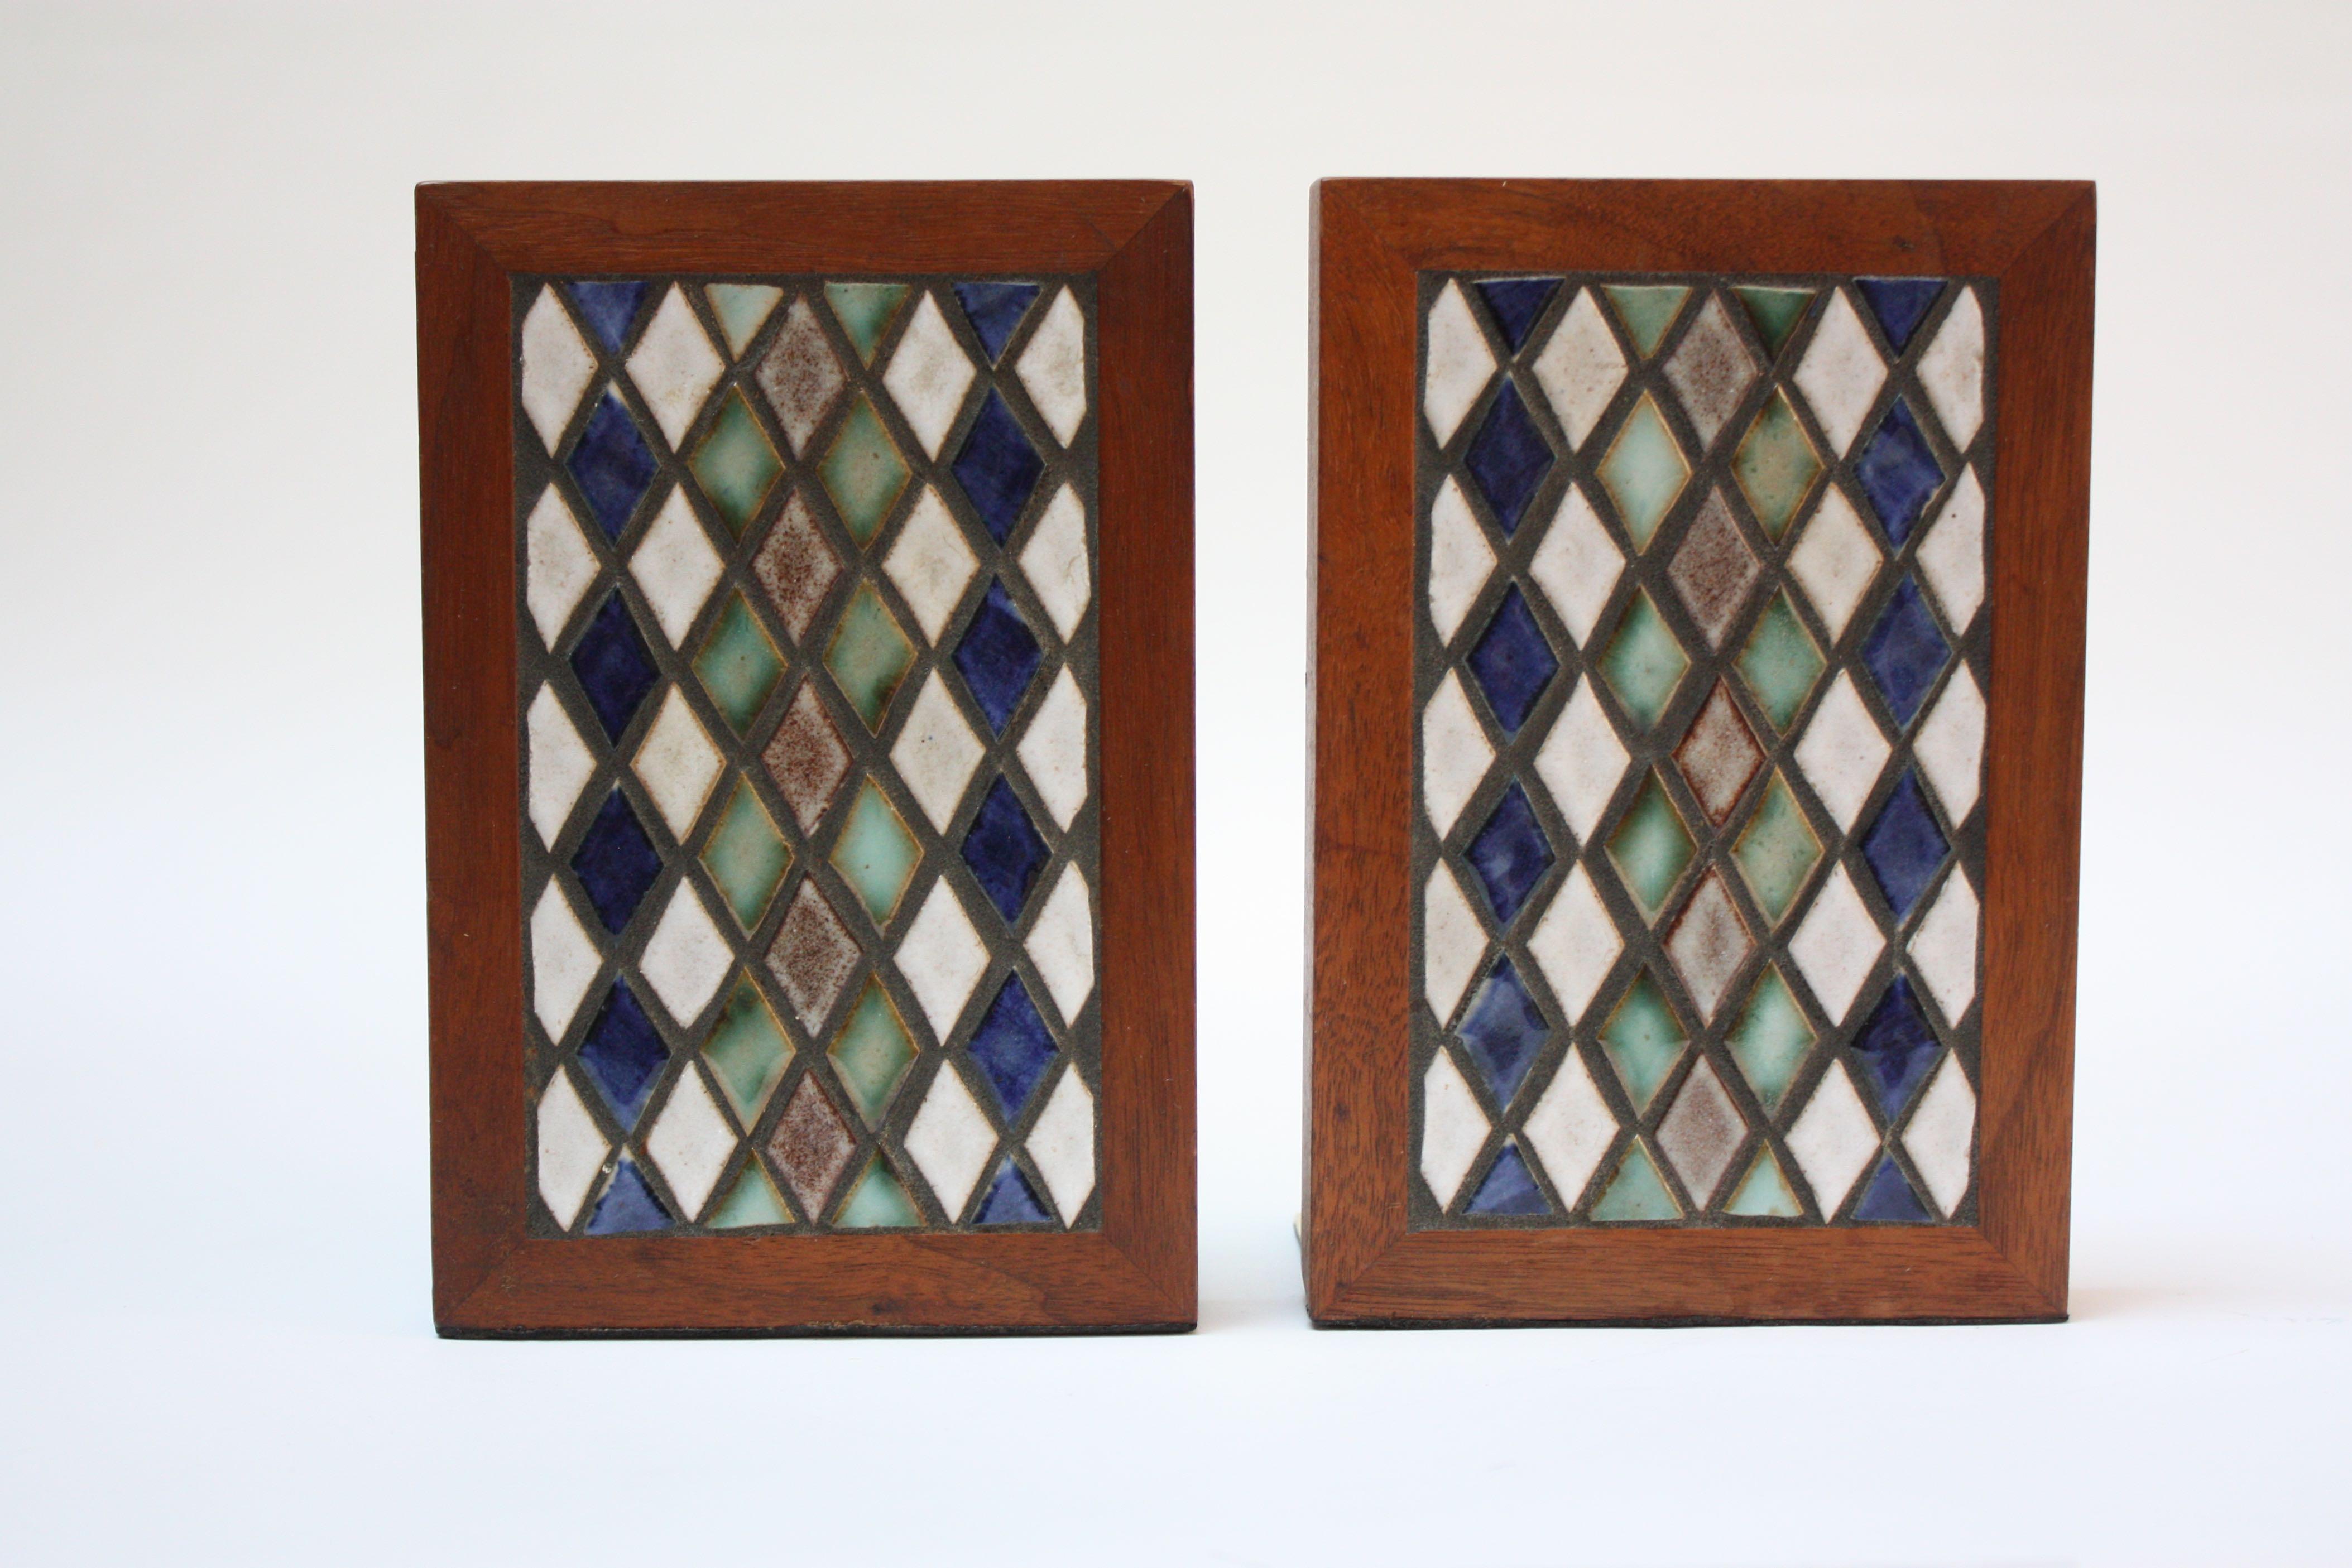 Pair of Gordon and Jane Martz for Marshall Studios walnut and brass bookends with ceramic diamond tile inlay (model #TBE1-21, circa 1957). Boasts vibrant colors of taupe, green, blue and white. Ceramic and walnut are pristine; brass to one of the